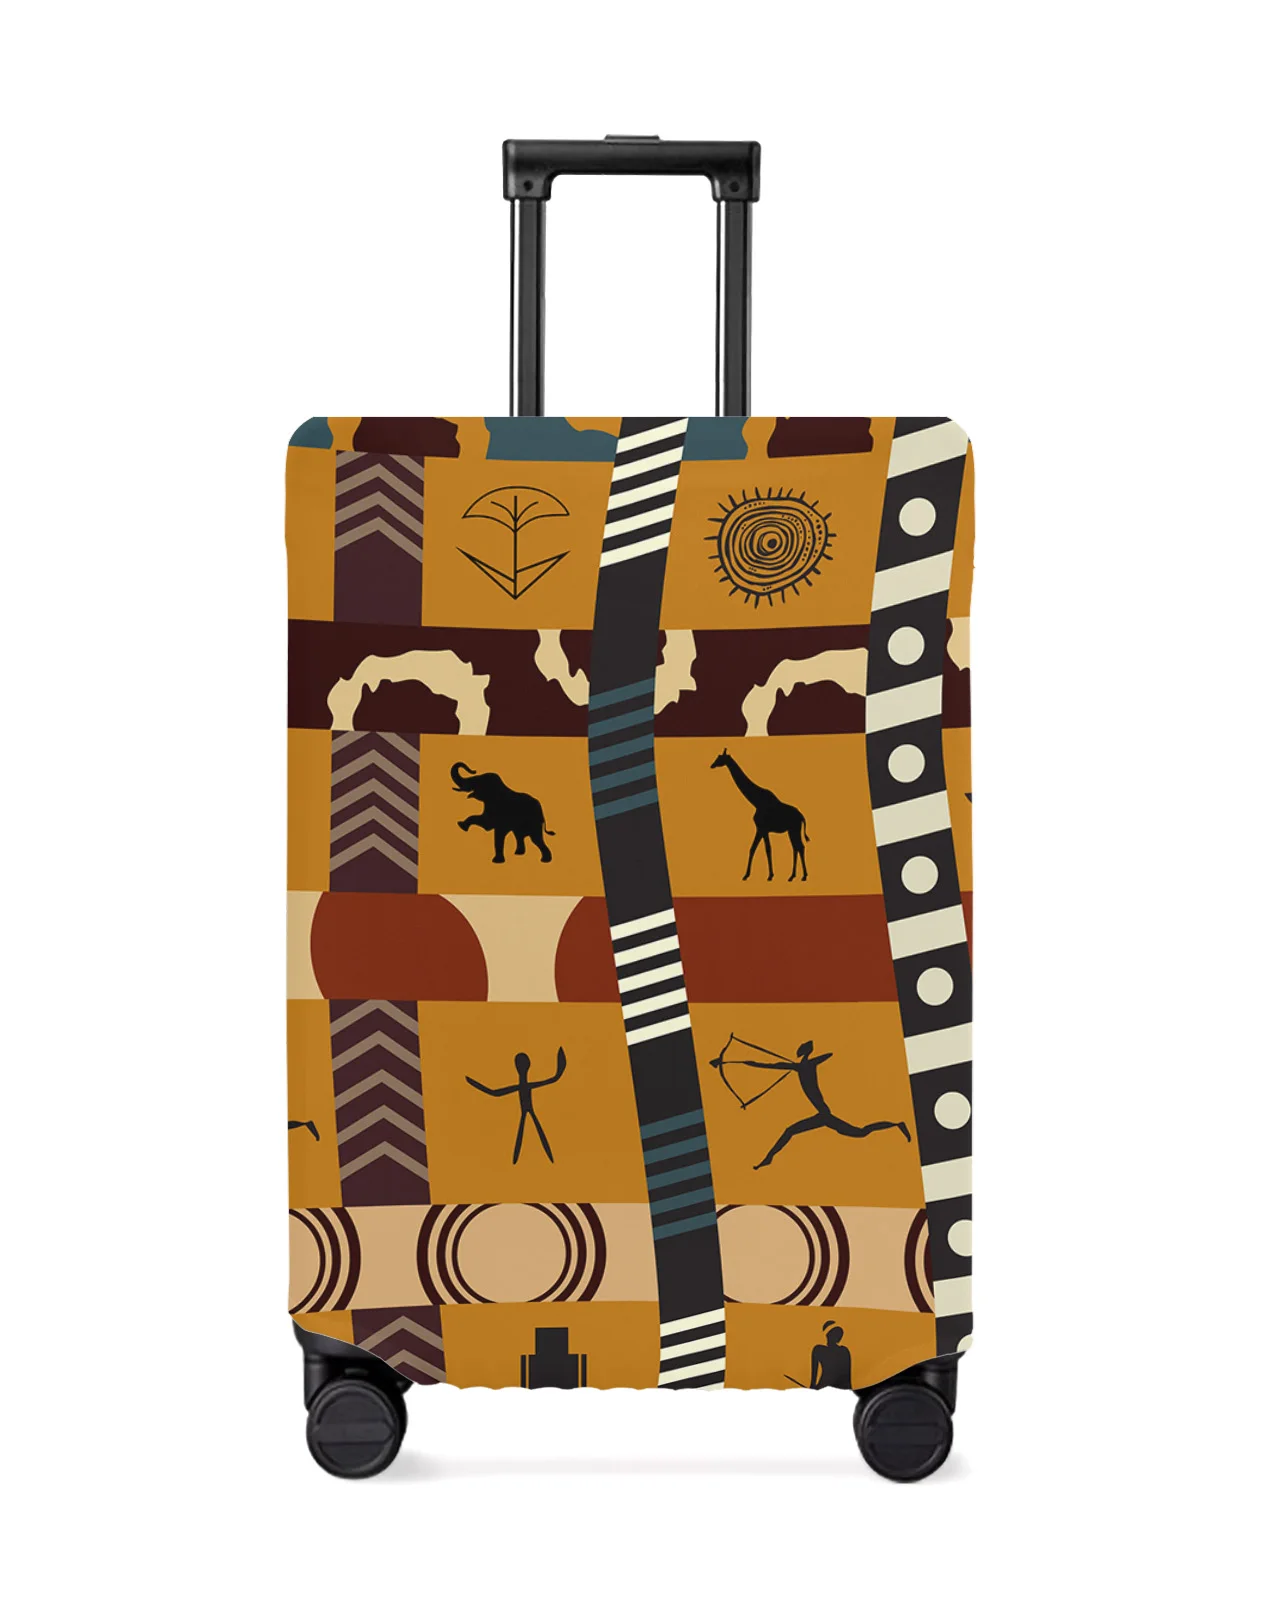 african-style-tribal-culture-elephant-giraffe-luggage-cover-travel-accessories-suitcase-elastic-dust-case-protect-sleeve